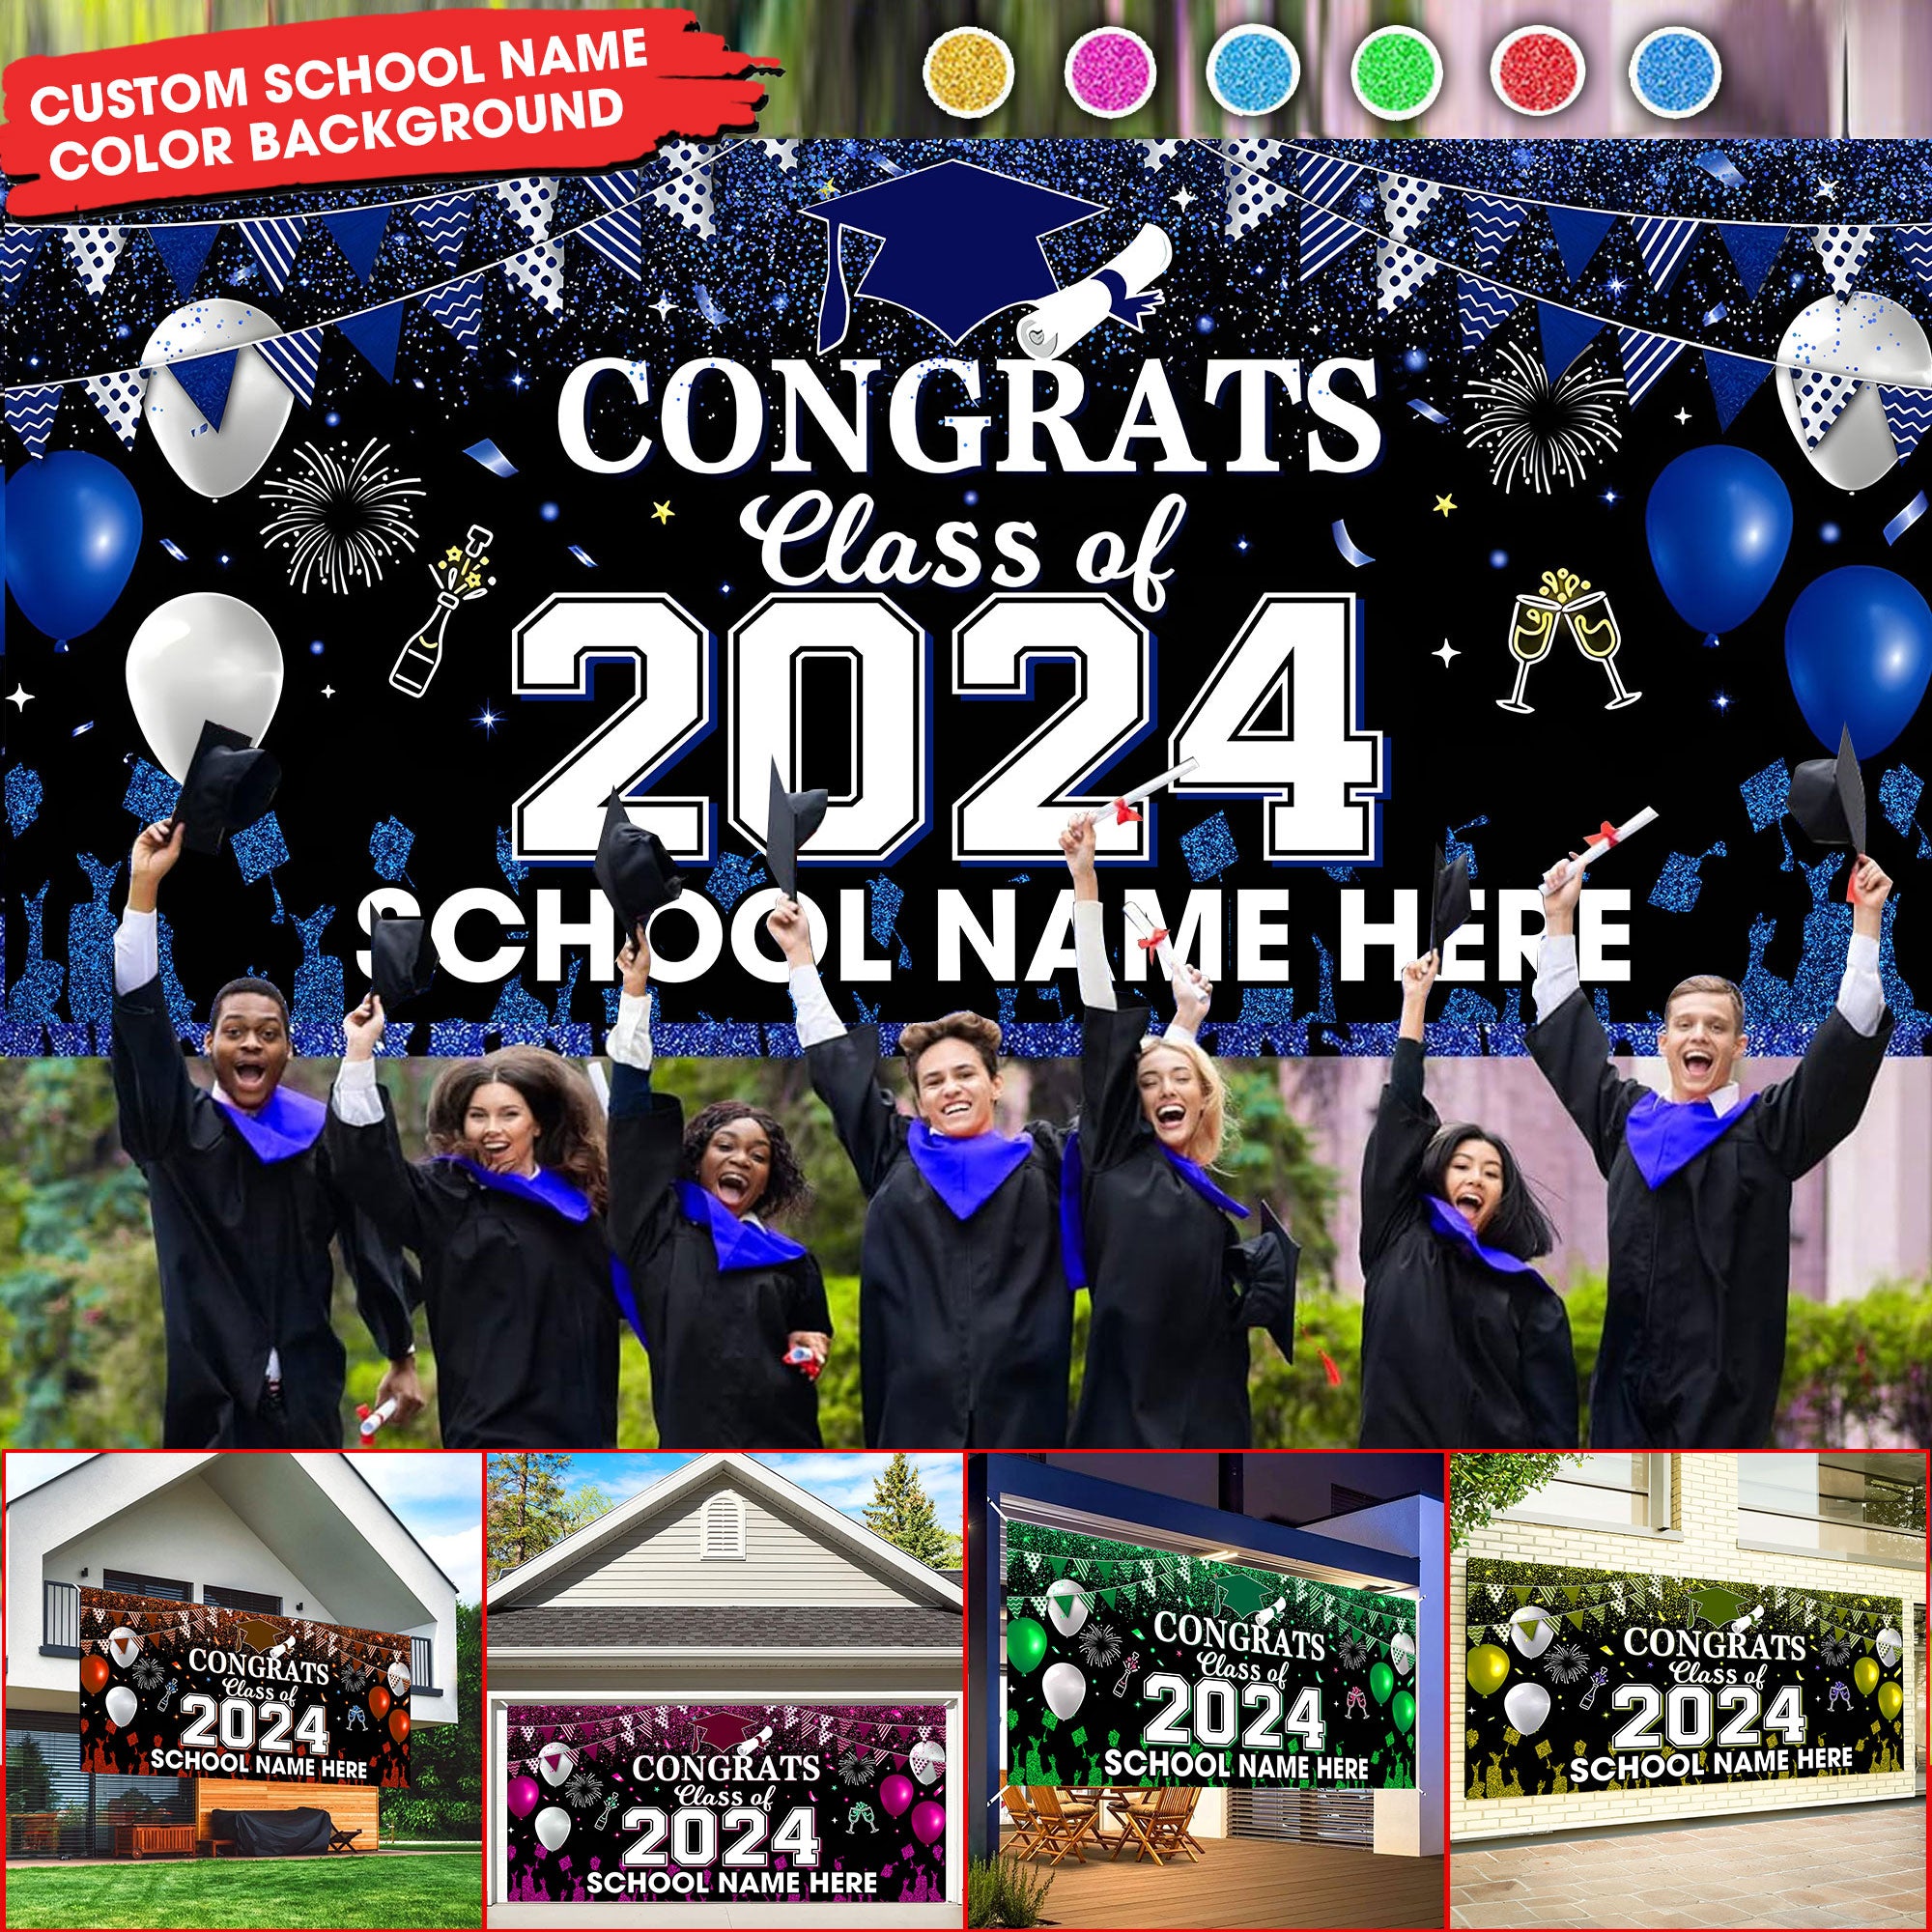 Congrats Class Of 2024 - Personalized Single Garage, Garage Door Banner Covers - Banner Decorations